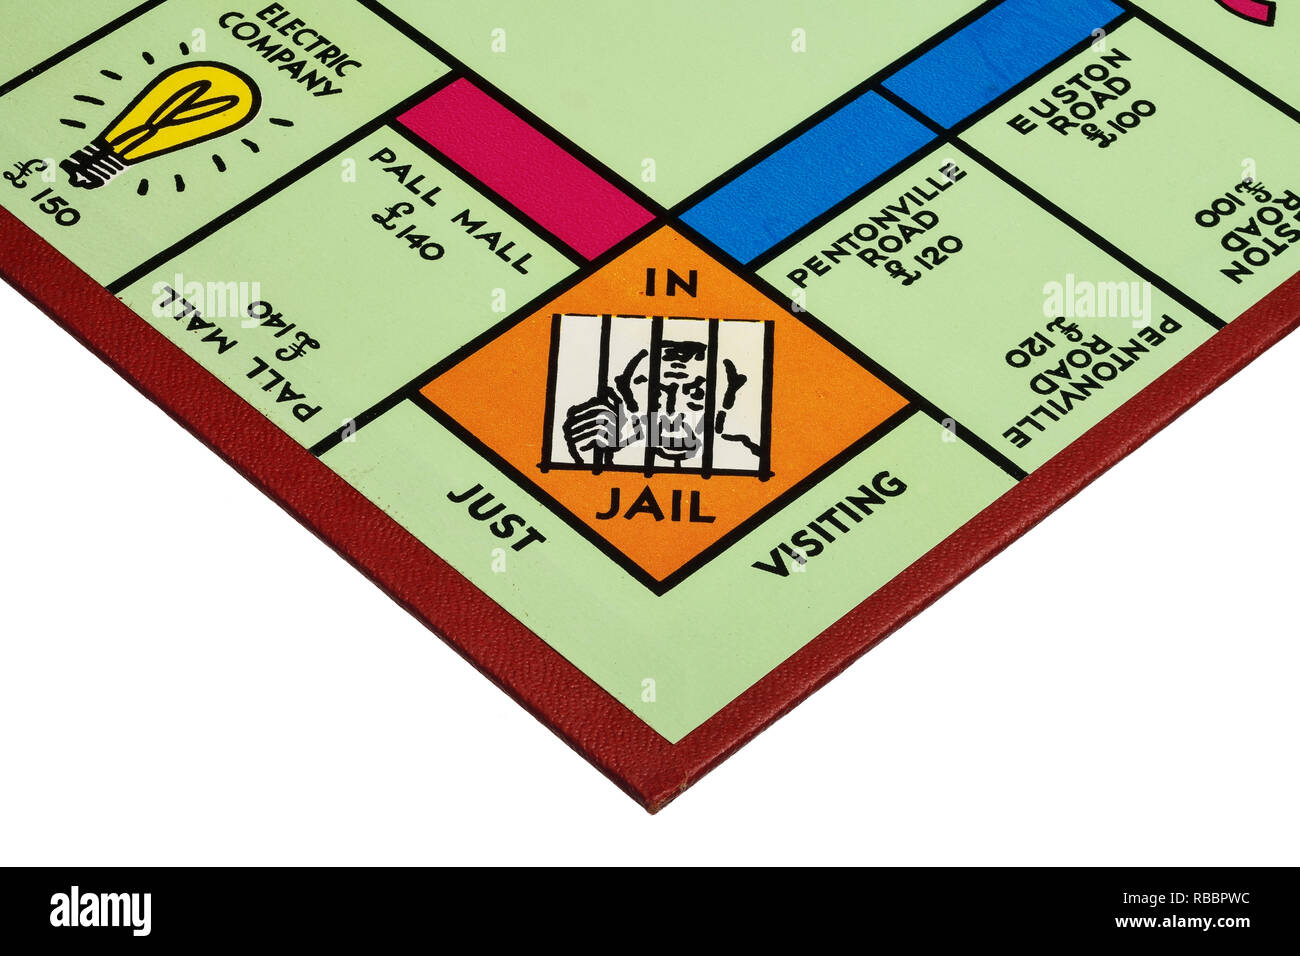 Close up detail of a corner of the playing board for the game of Monopoly showing In Jail and Just Visiting Stock Photo